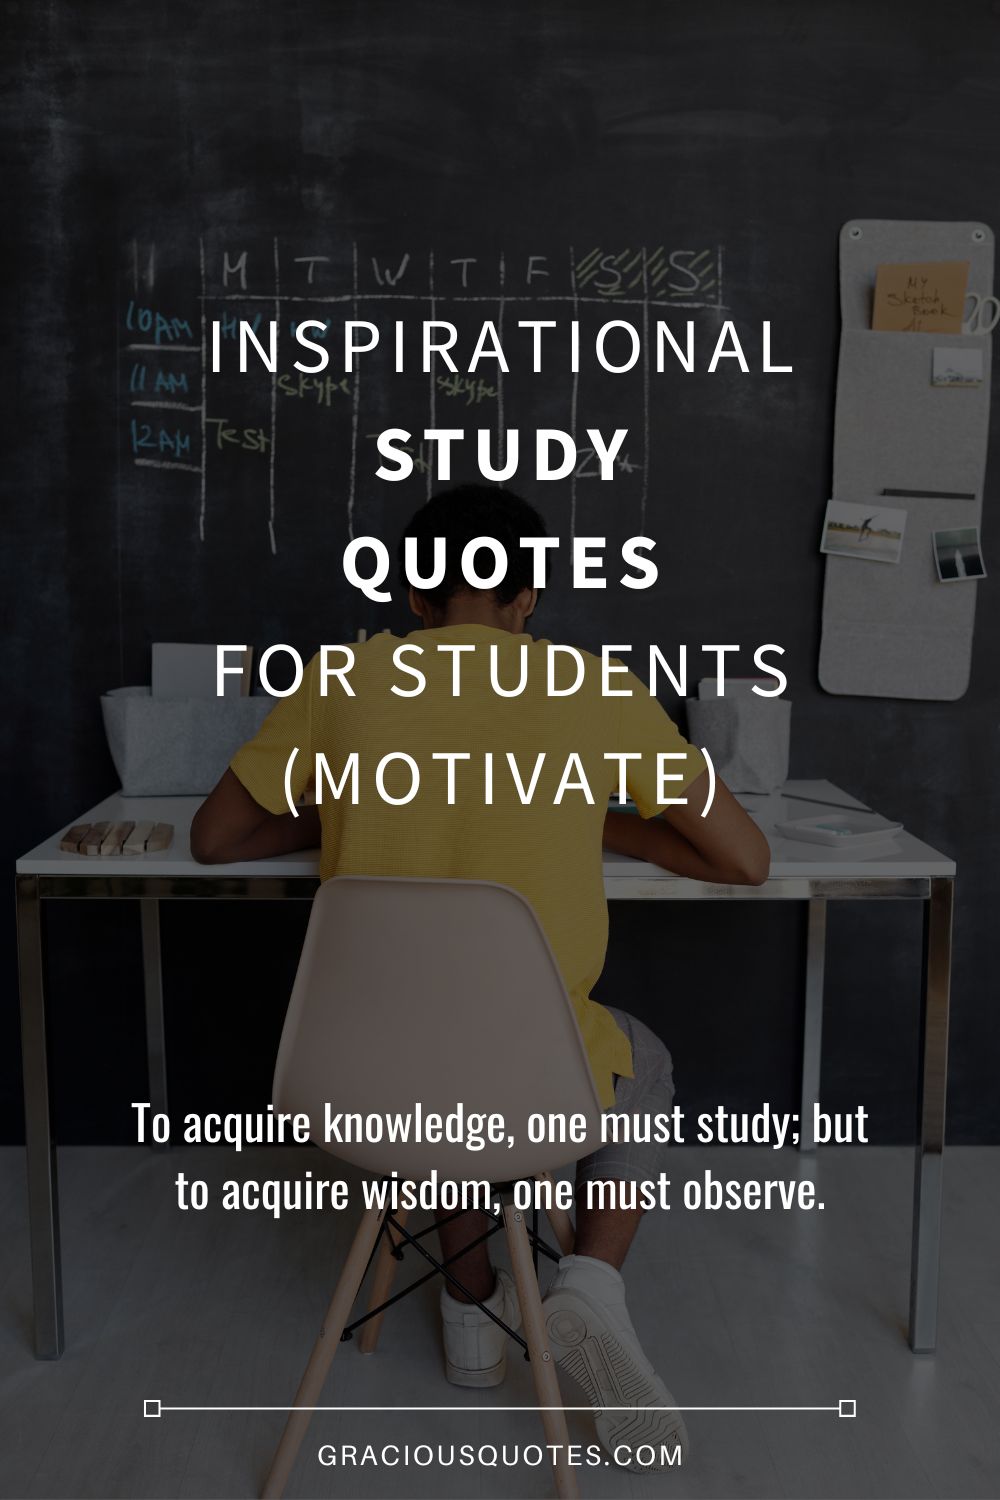 Inspirational Study Quotes for Students (MOTIVATE) - Gracious Quotes